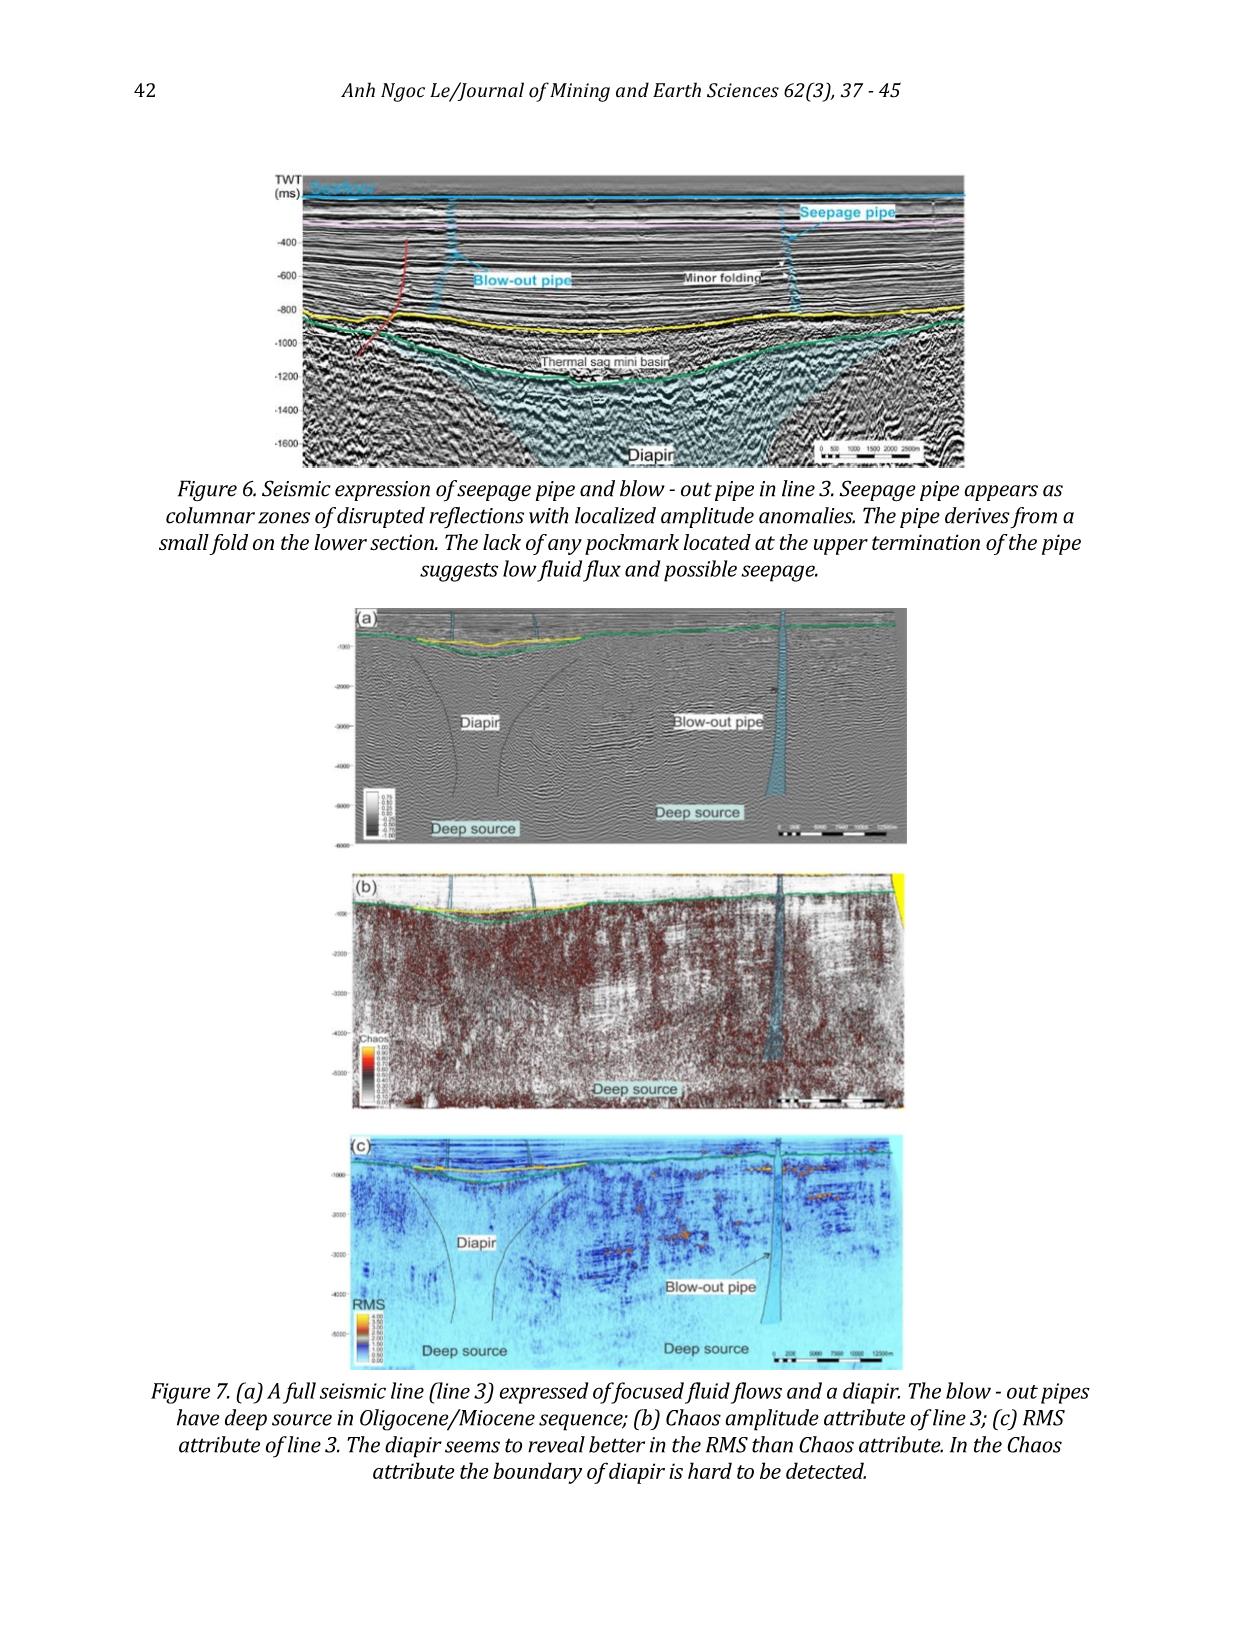 Geological controls on focused fluid flow in the Song Hong Basin, offshore Vietnam trang 6